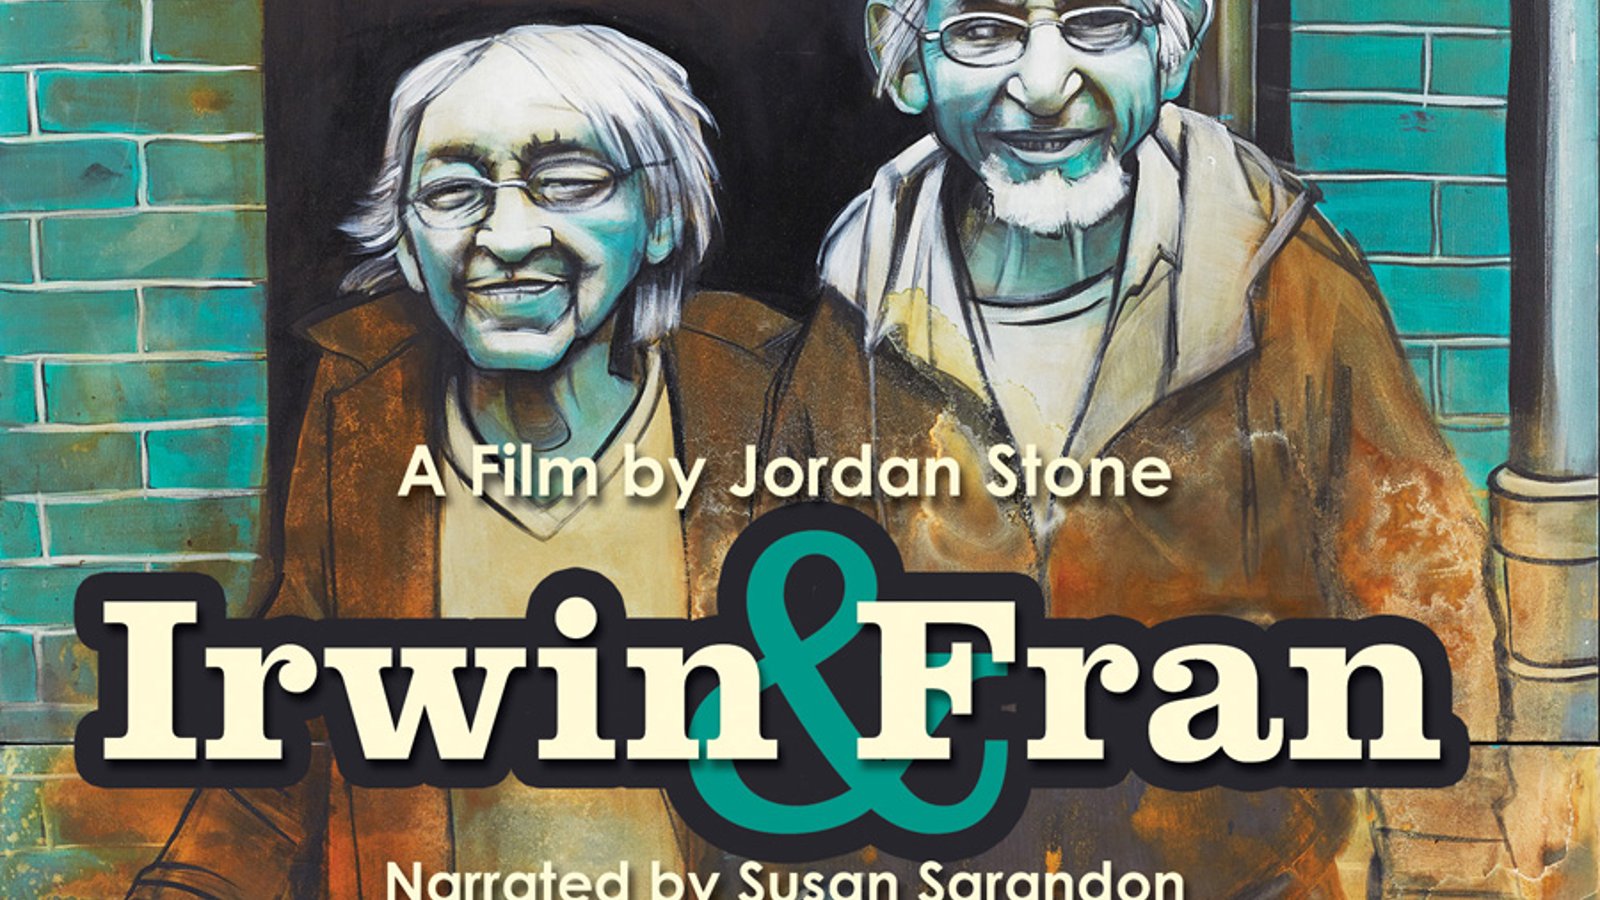 Irwin and Fran - The Life of a 100 Year Old Comedian